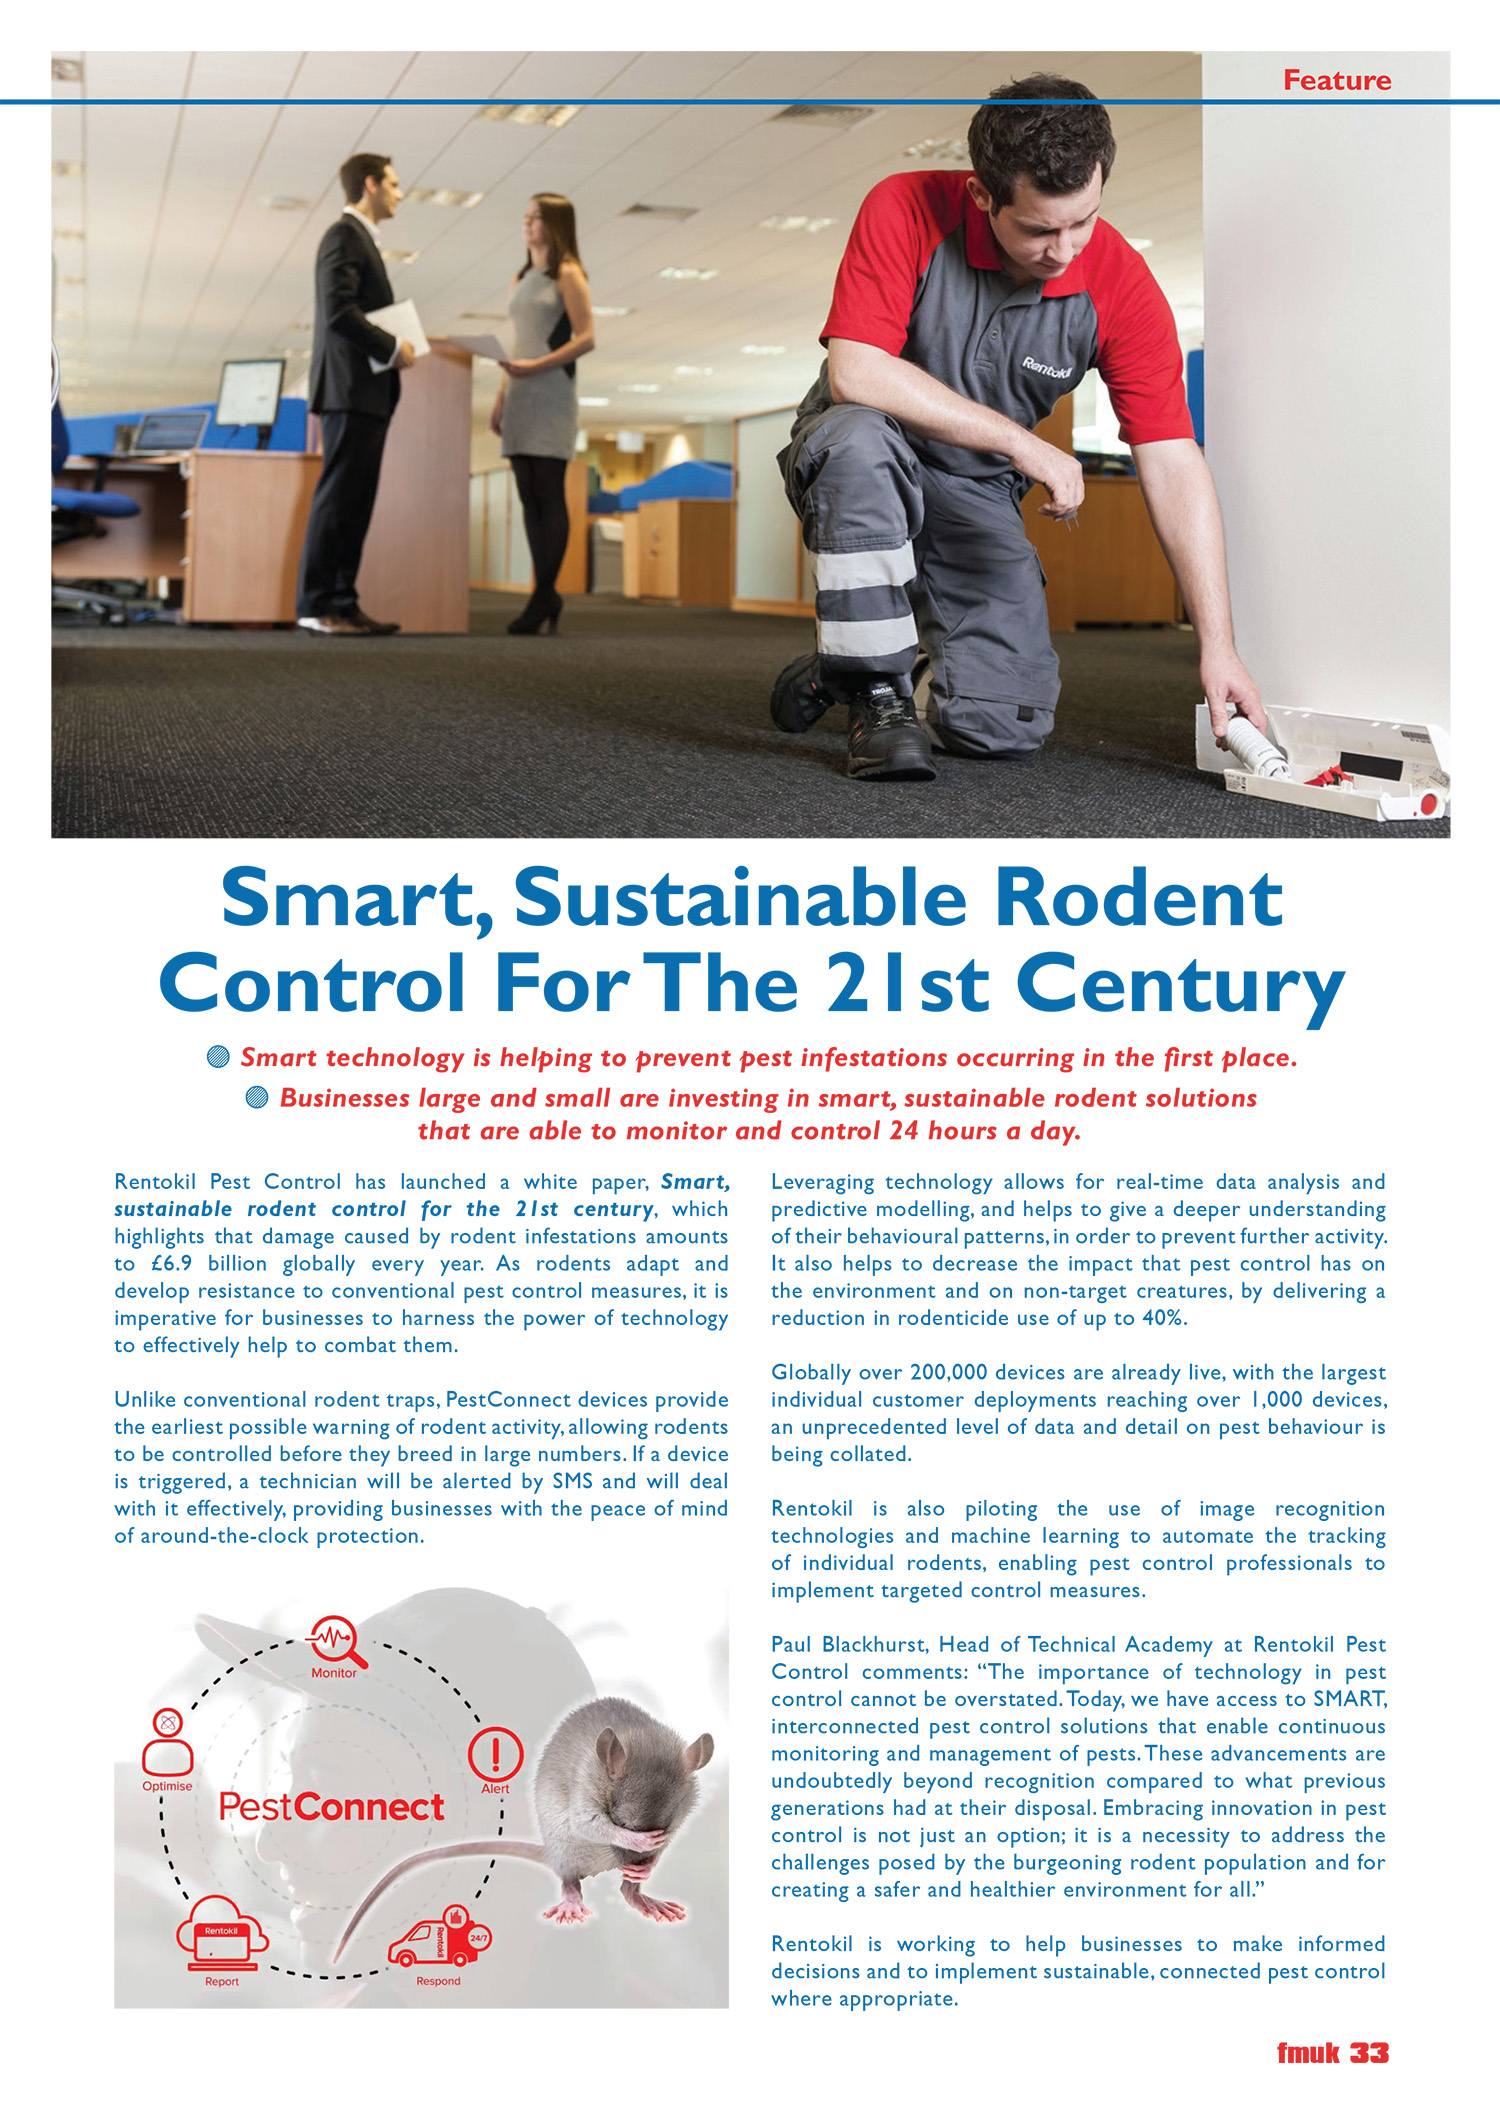 Smart, Sustainable Rodent Control For The 21st Century